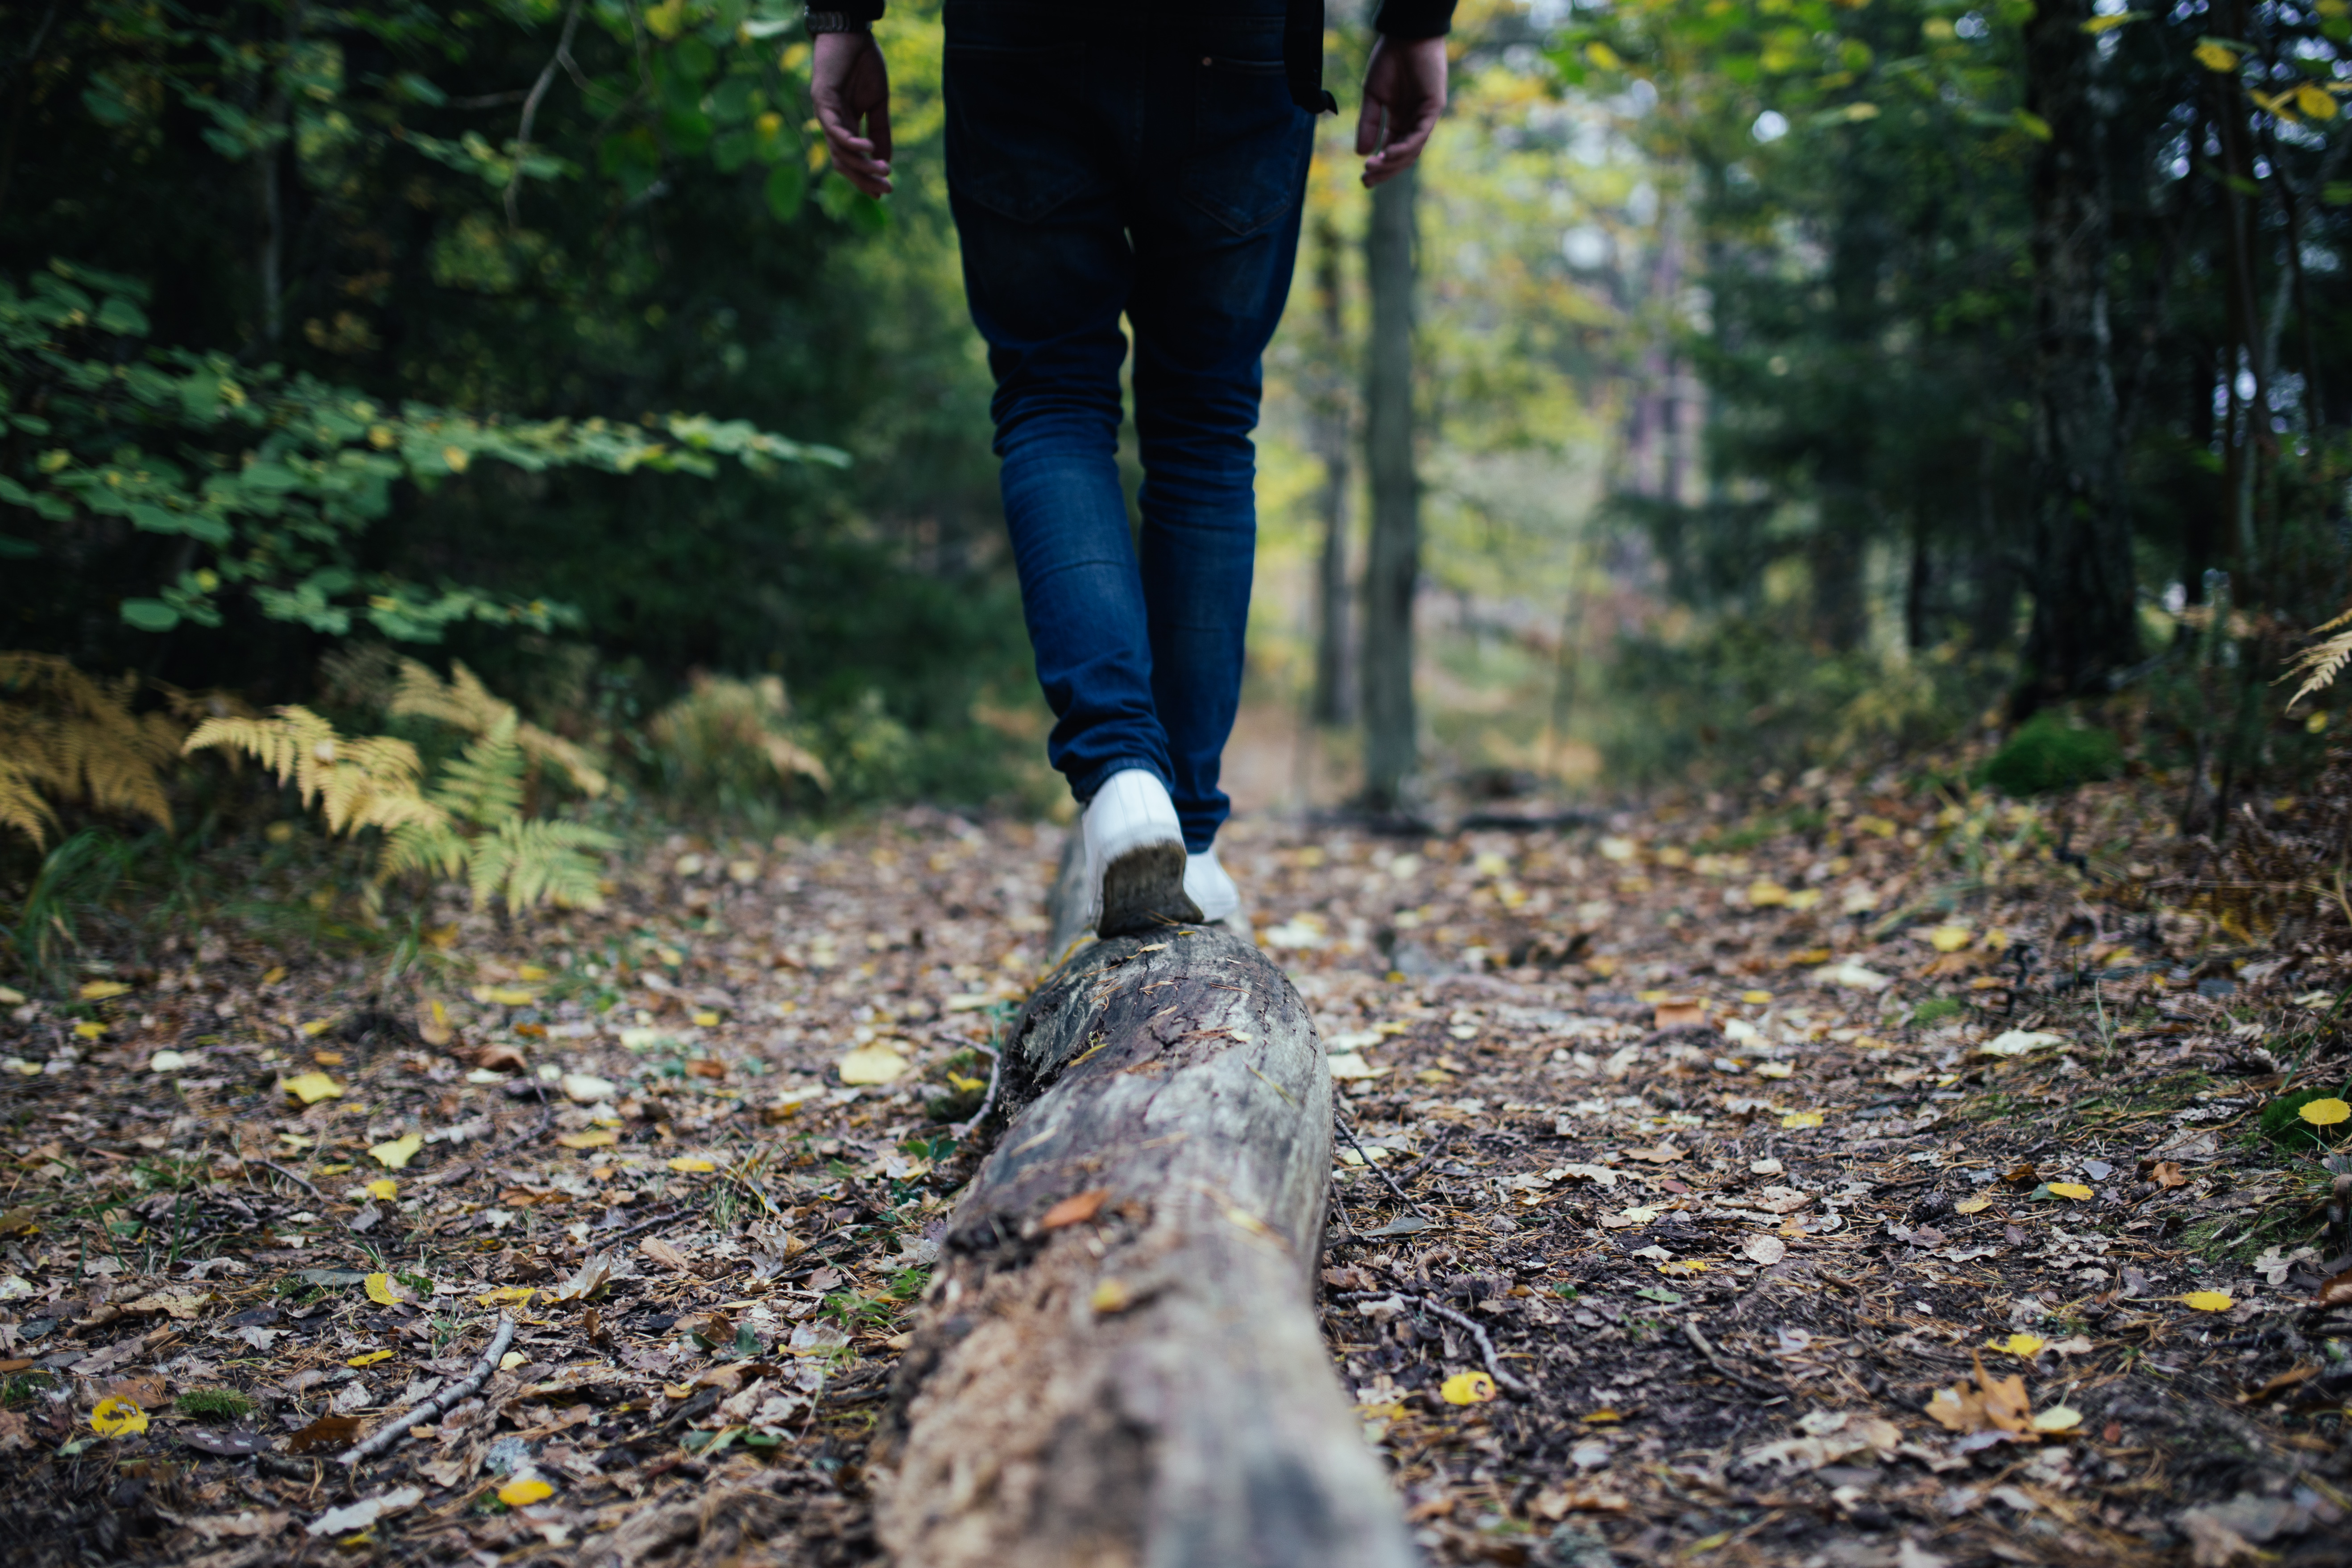 Person Walking on Log in Forest, Blue jeans, Forest, Human, Leaves, HQ Photo